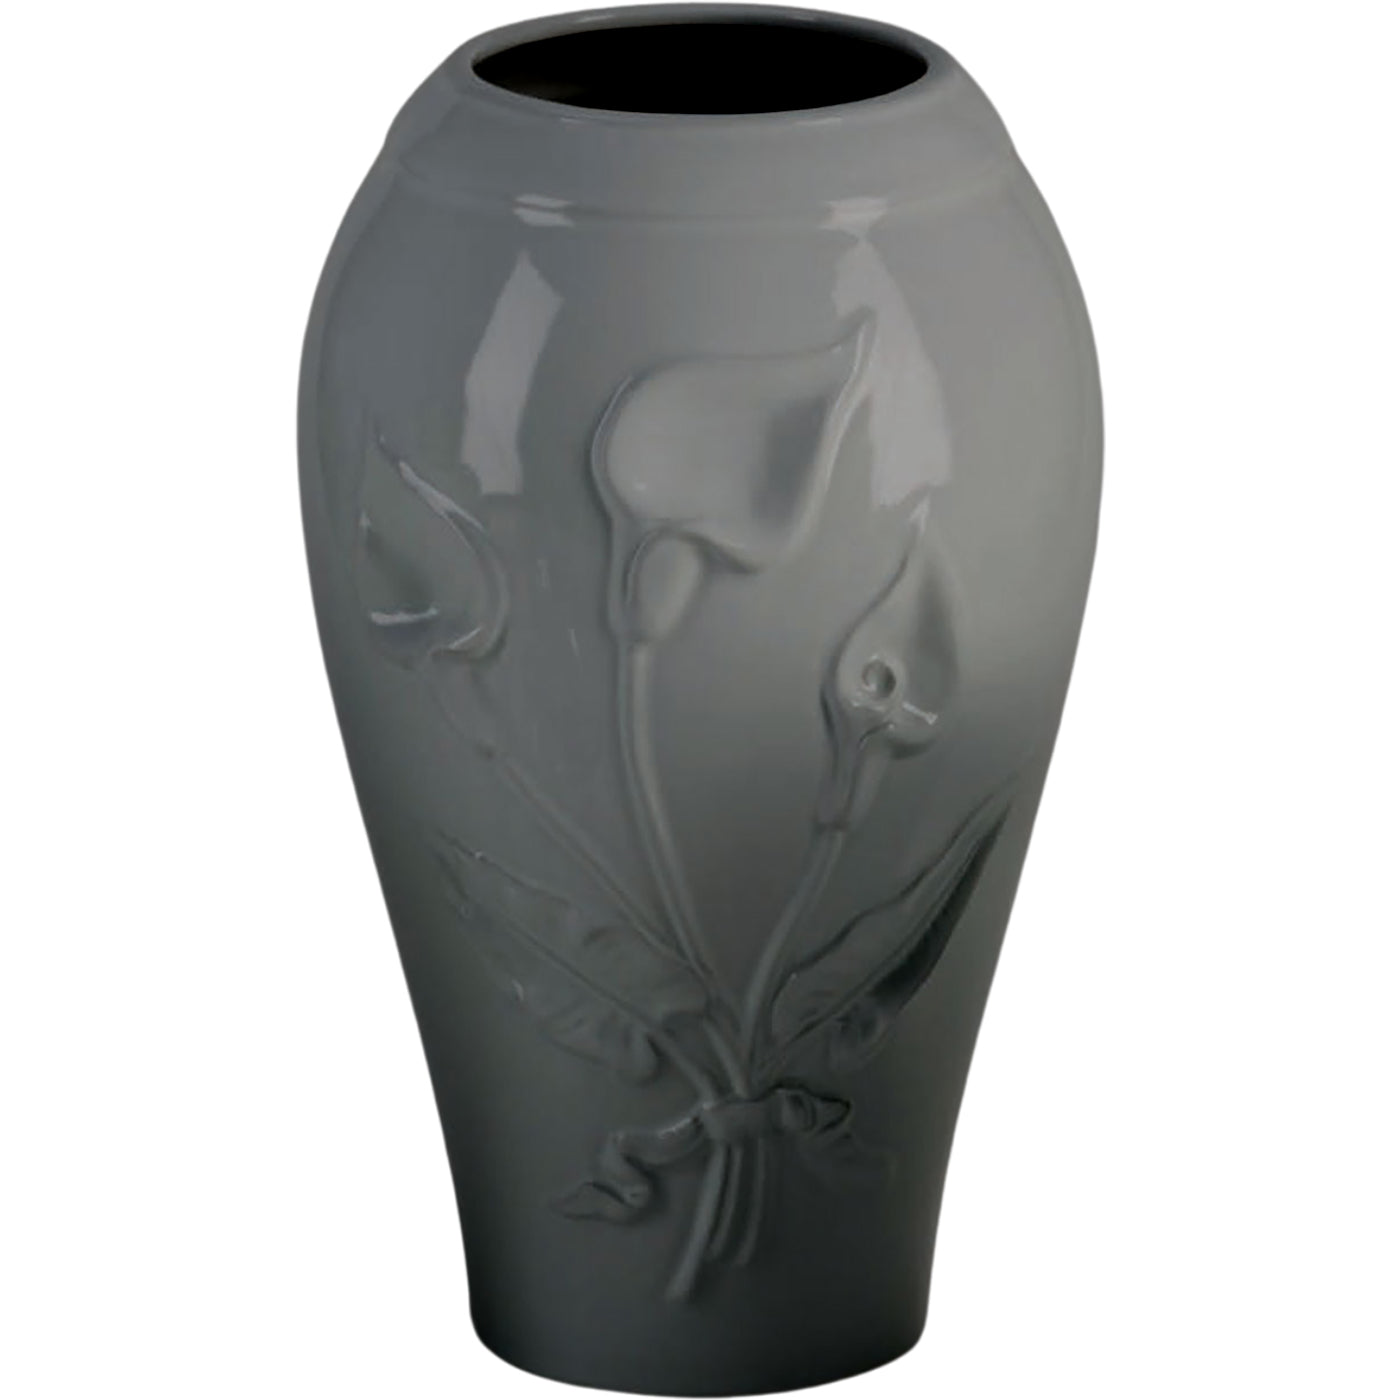 Grave vase Calla gray 21x13cm - 8.3x5.1in In gray porcelain, ground attached CAL162P/G